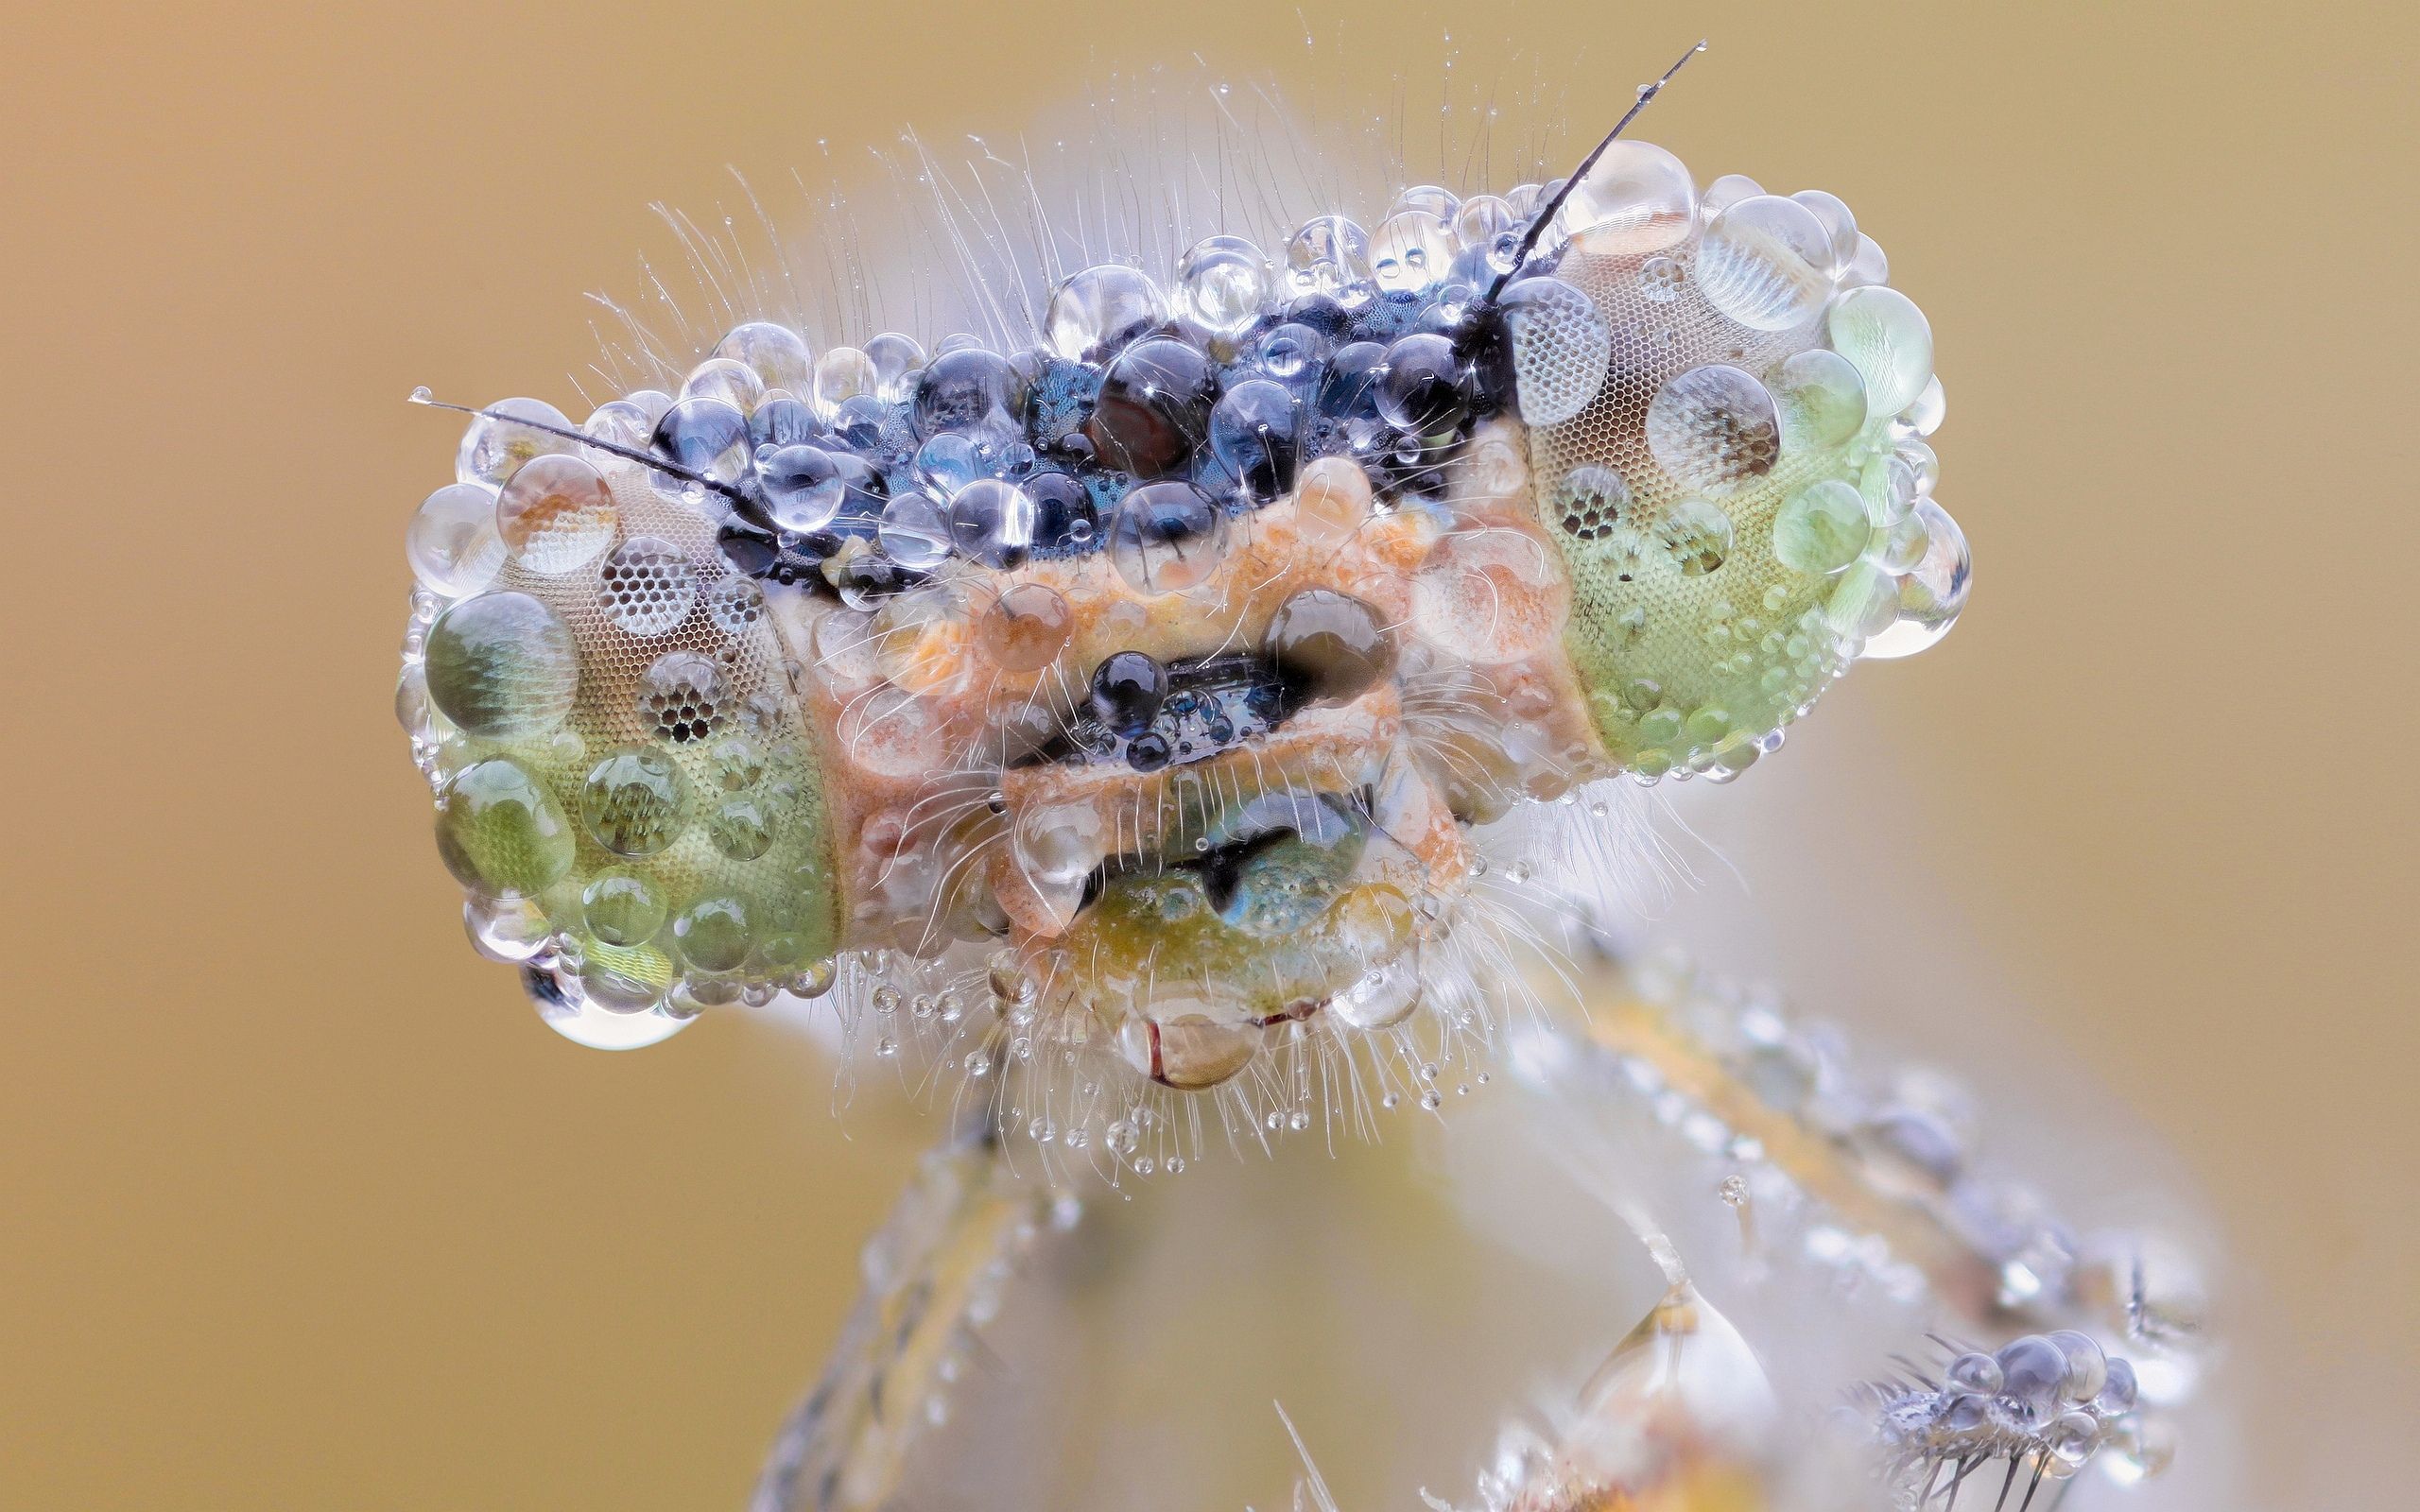 HD wallpaper, Drenched, Dragonfly